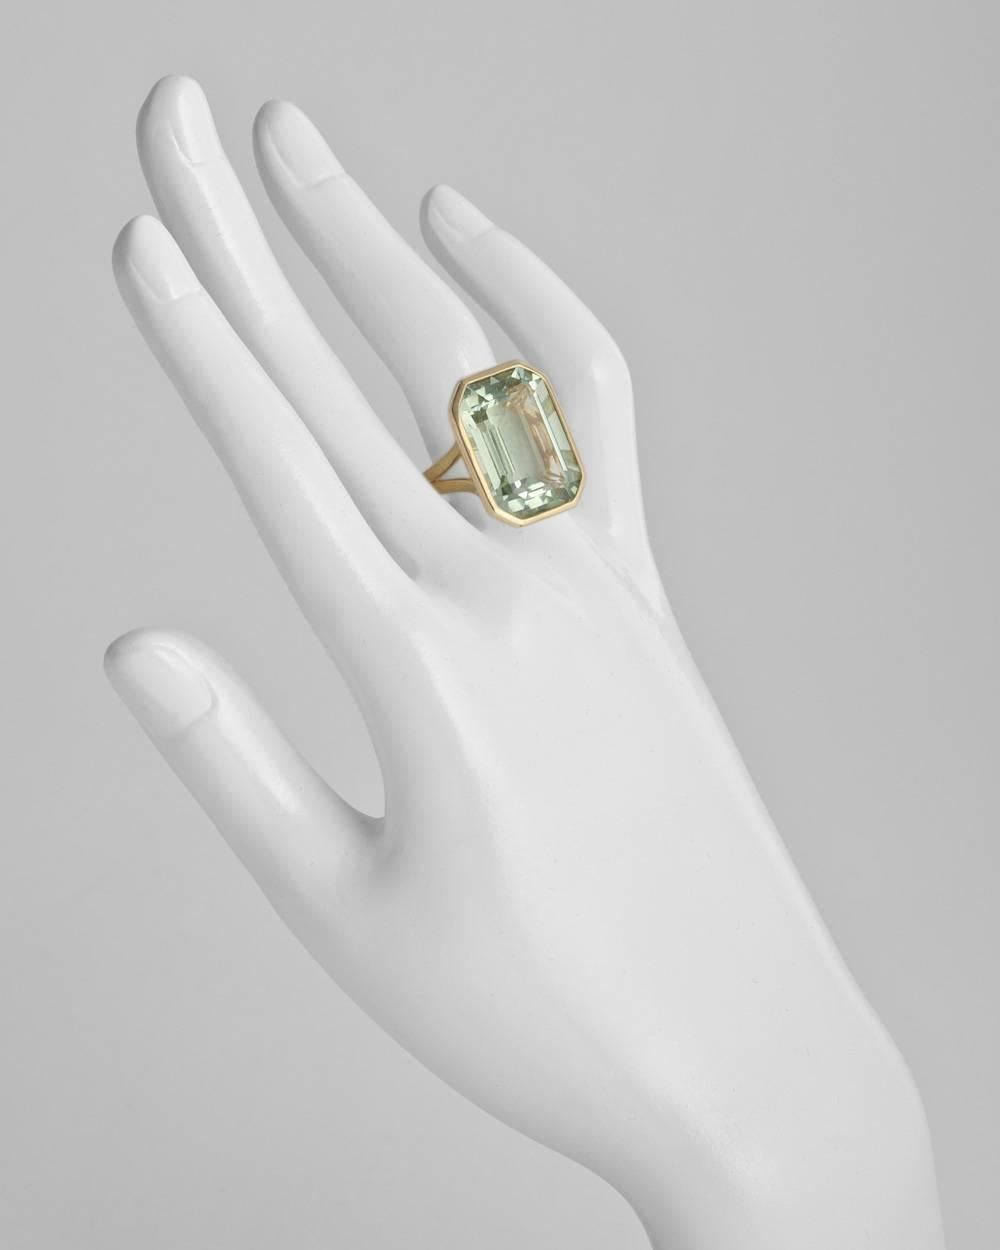 Bezel-set prasiolite cocktail ring, showcasing an emerald-cut prasiolite weighing 17.99 carats and measuring 20 x 15mm, mounted in 18k yellow gold with a split shank, designed by Goshwara. Size 7 (resizable to most ring sizes).